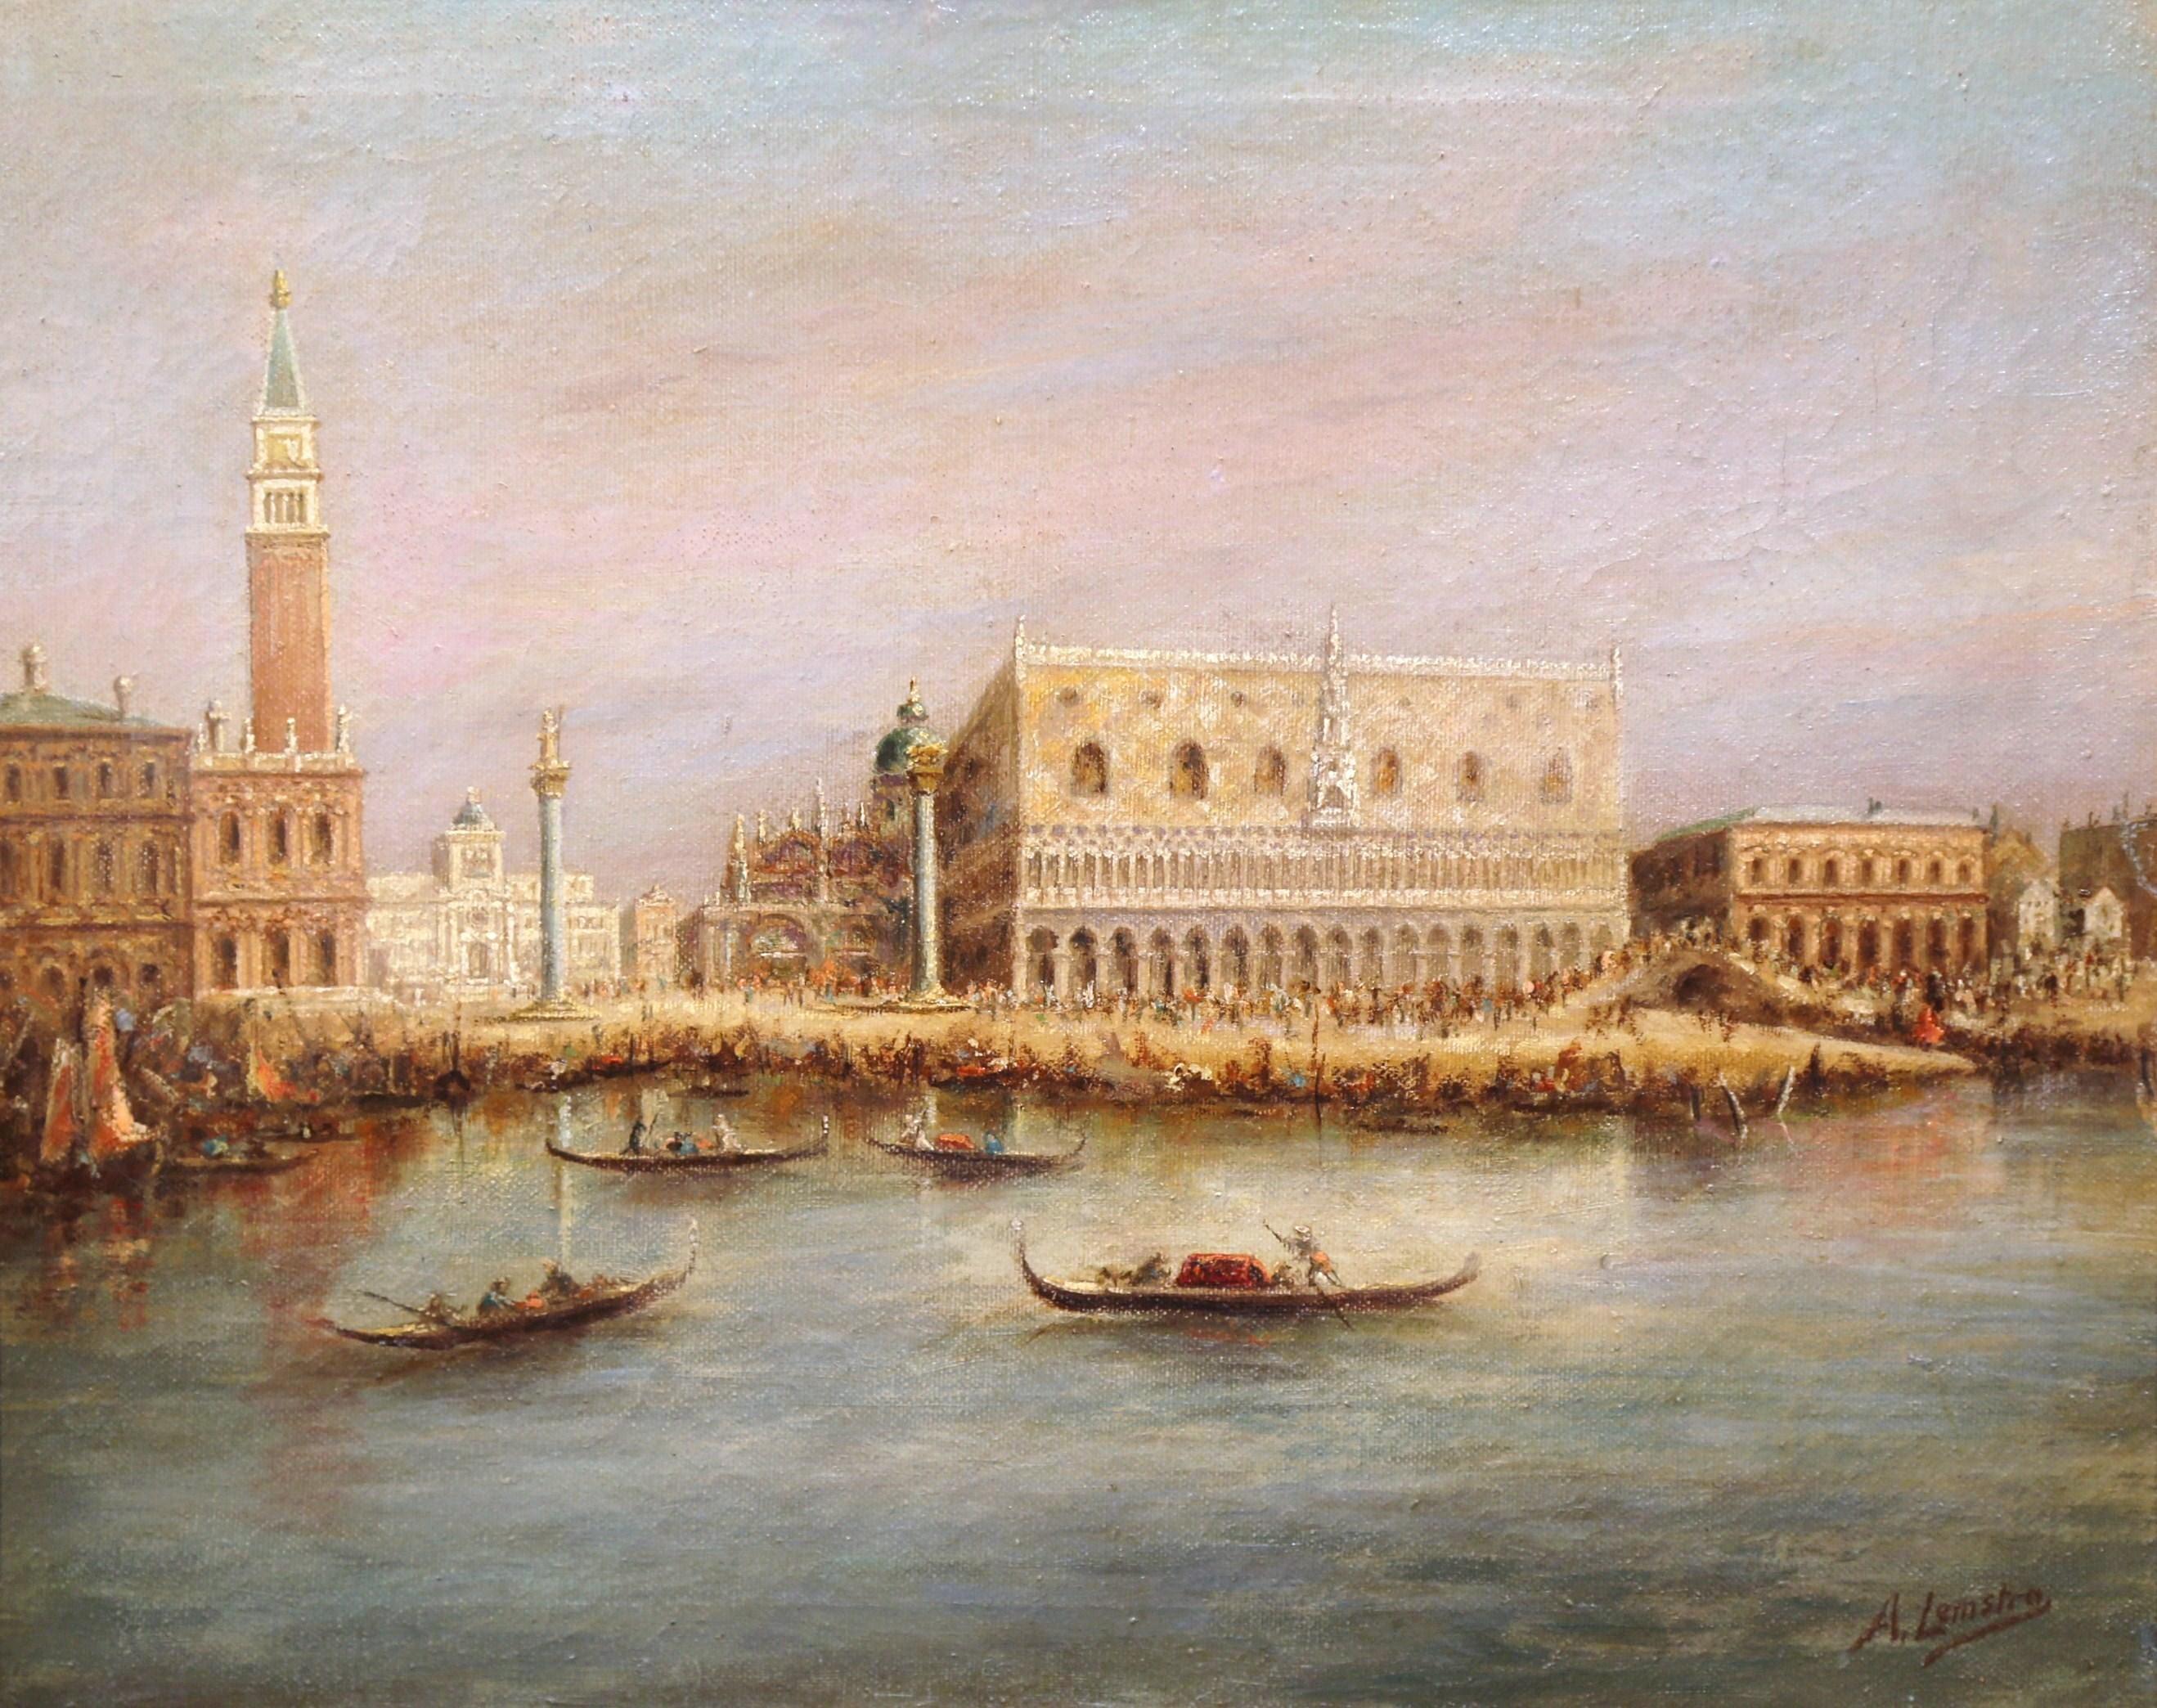 This beautiful, antique painting on canvas was painted in Italy, circa 1959. The artwork features a Classic, Venetian scene; the scene shows a waterfront view of the Doge's Palace with gondolas in the foreground. The Classic, Italian cityscape